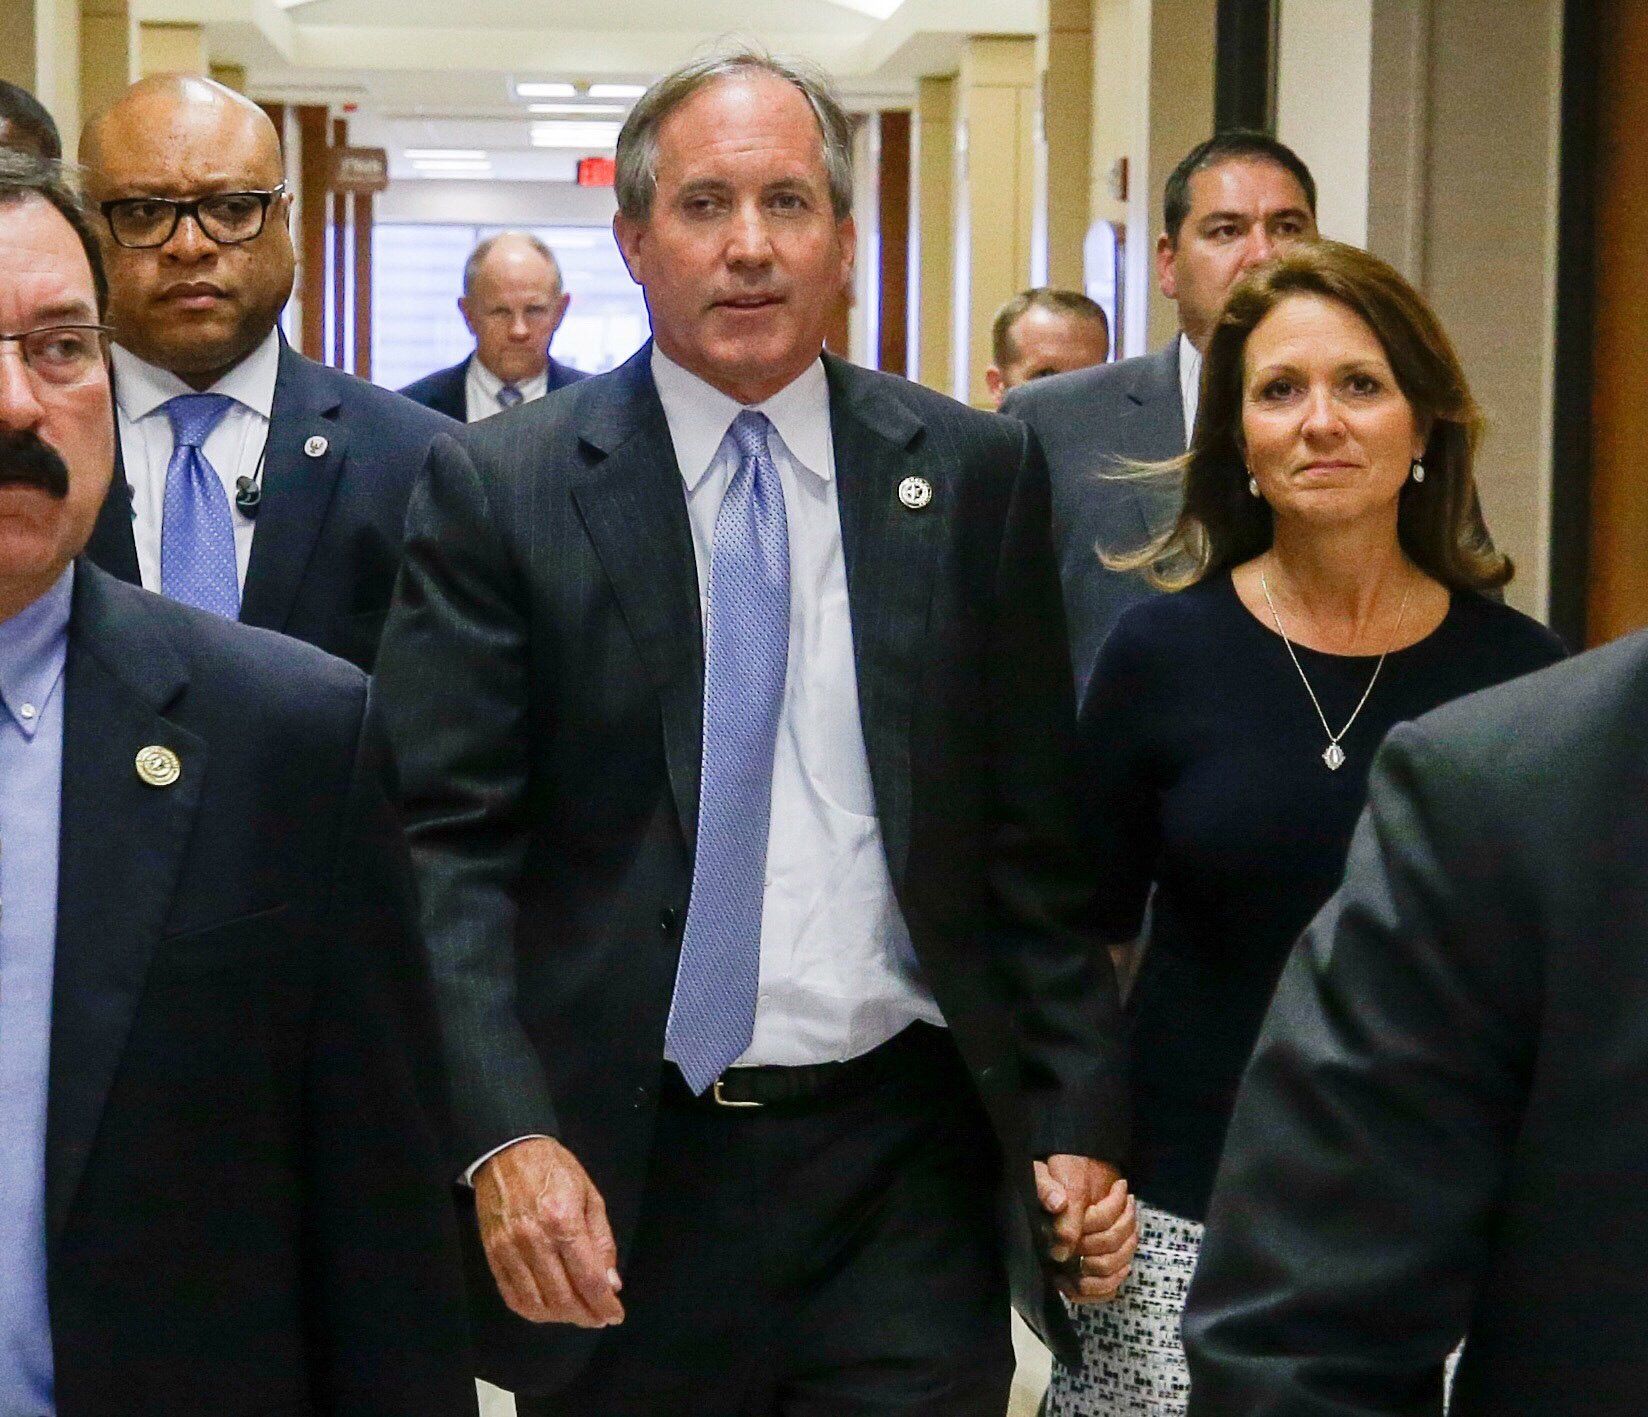 PHOTO: In this July 27, 2017, file photo, Republican Texas Attorney General Ken Paxton and his wife Angela Paxton, arrive for a hearing in the Harris County Criminal District Court in Houston, Texas.